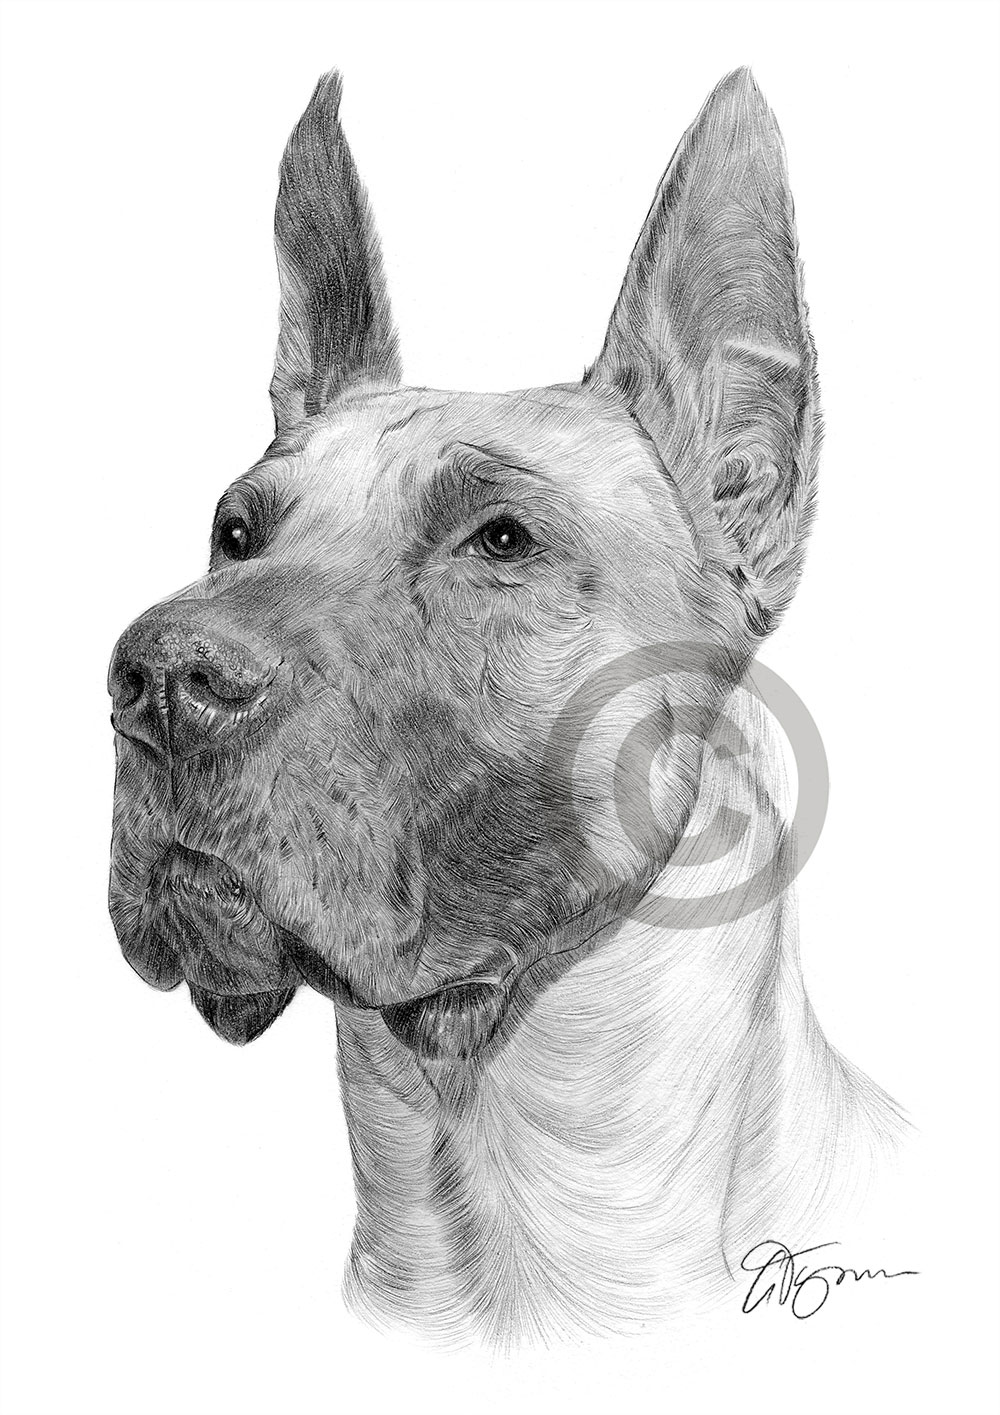 Pencil drawing of an adult Great Dane by artist Gary Tymon